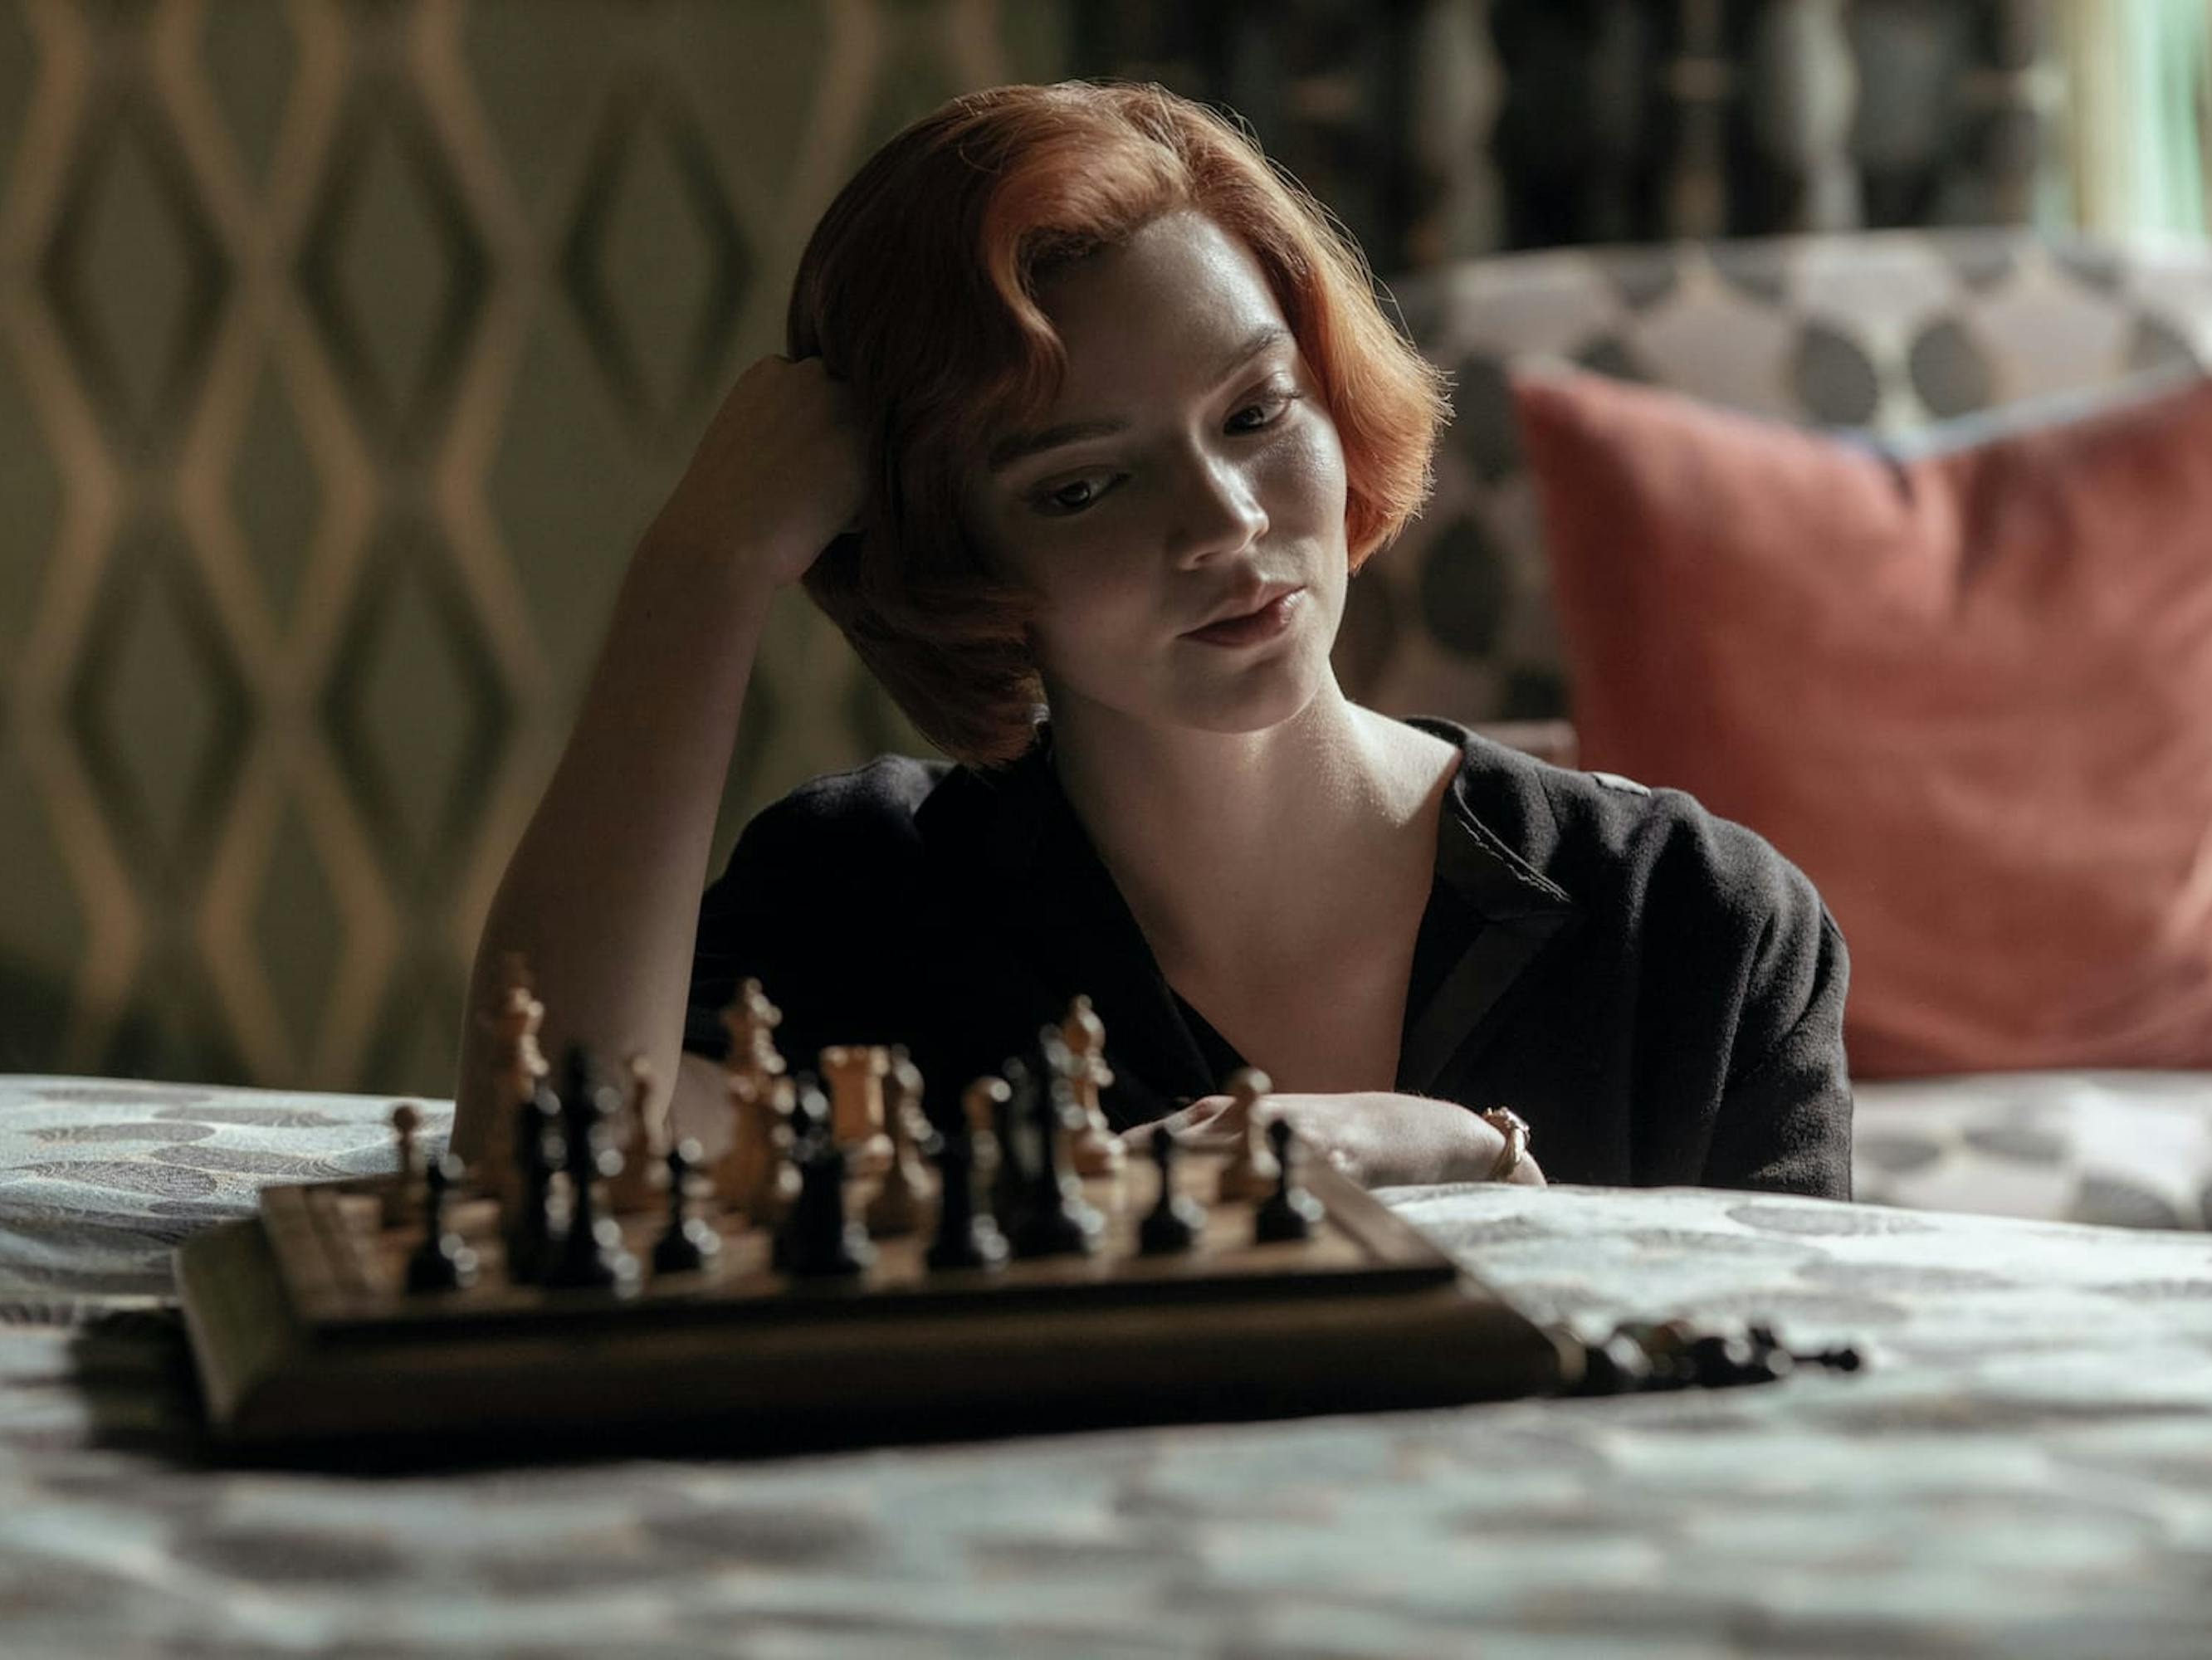 The Story Behind Beth Harmon's Red Hair in The Queen's Gambit